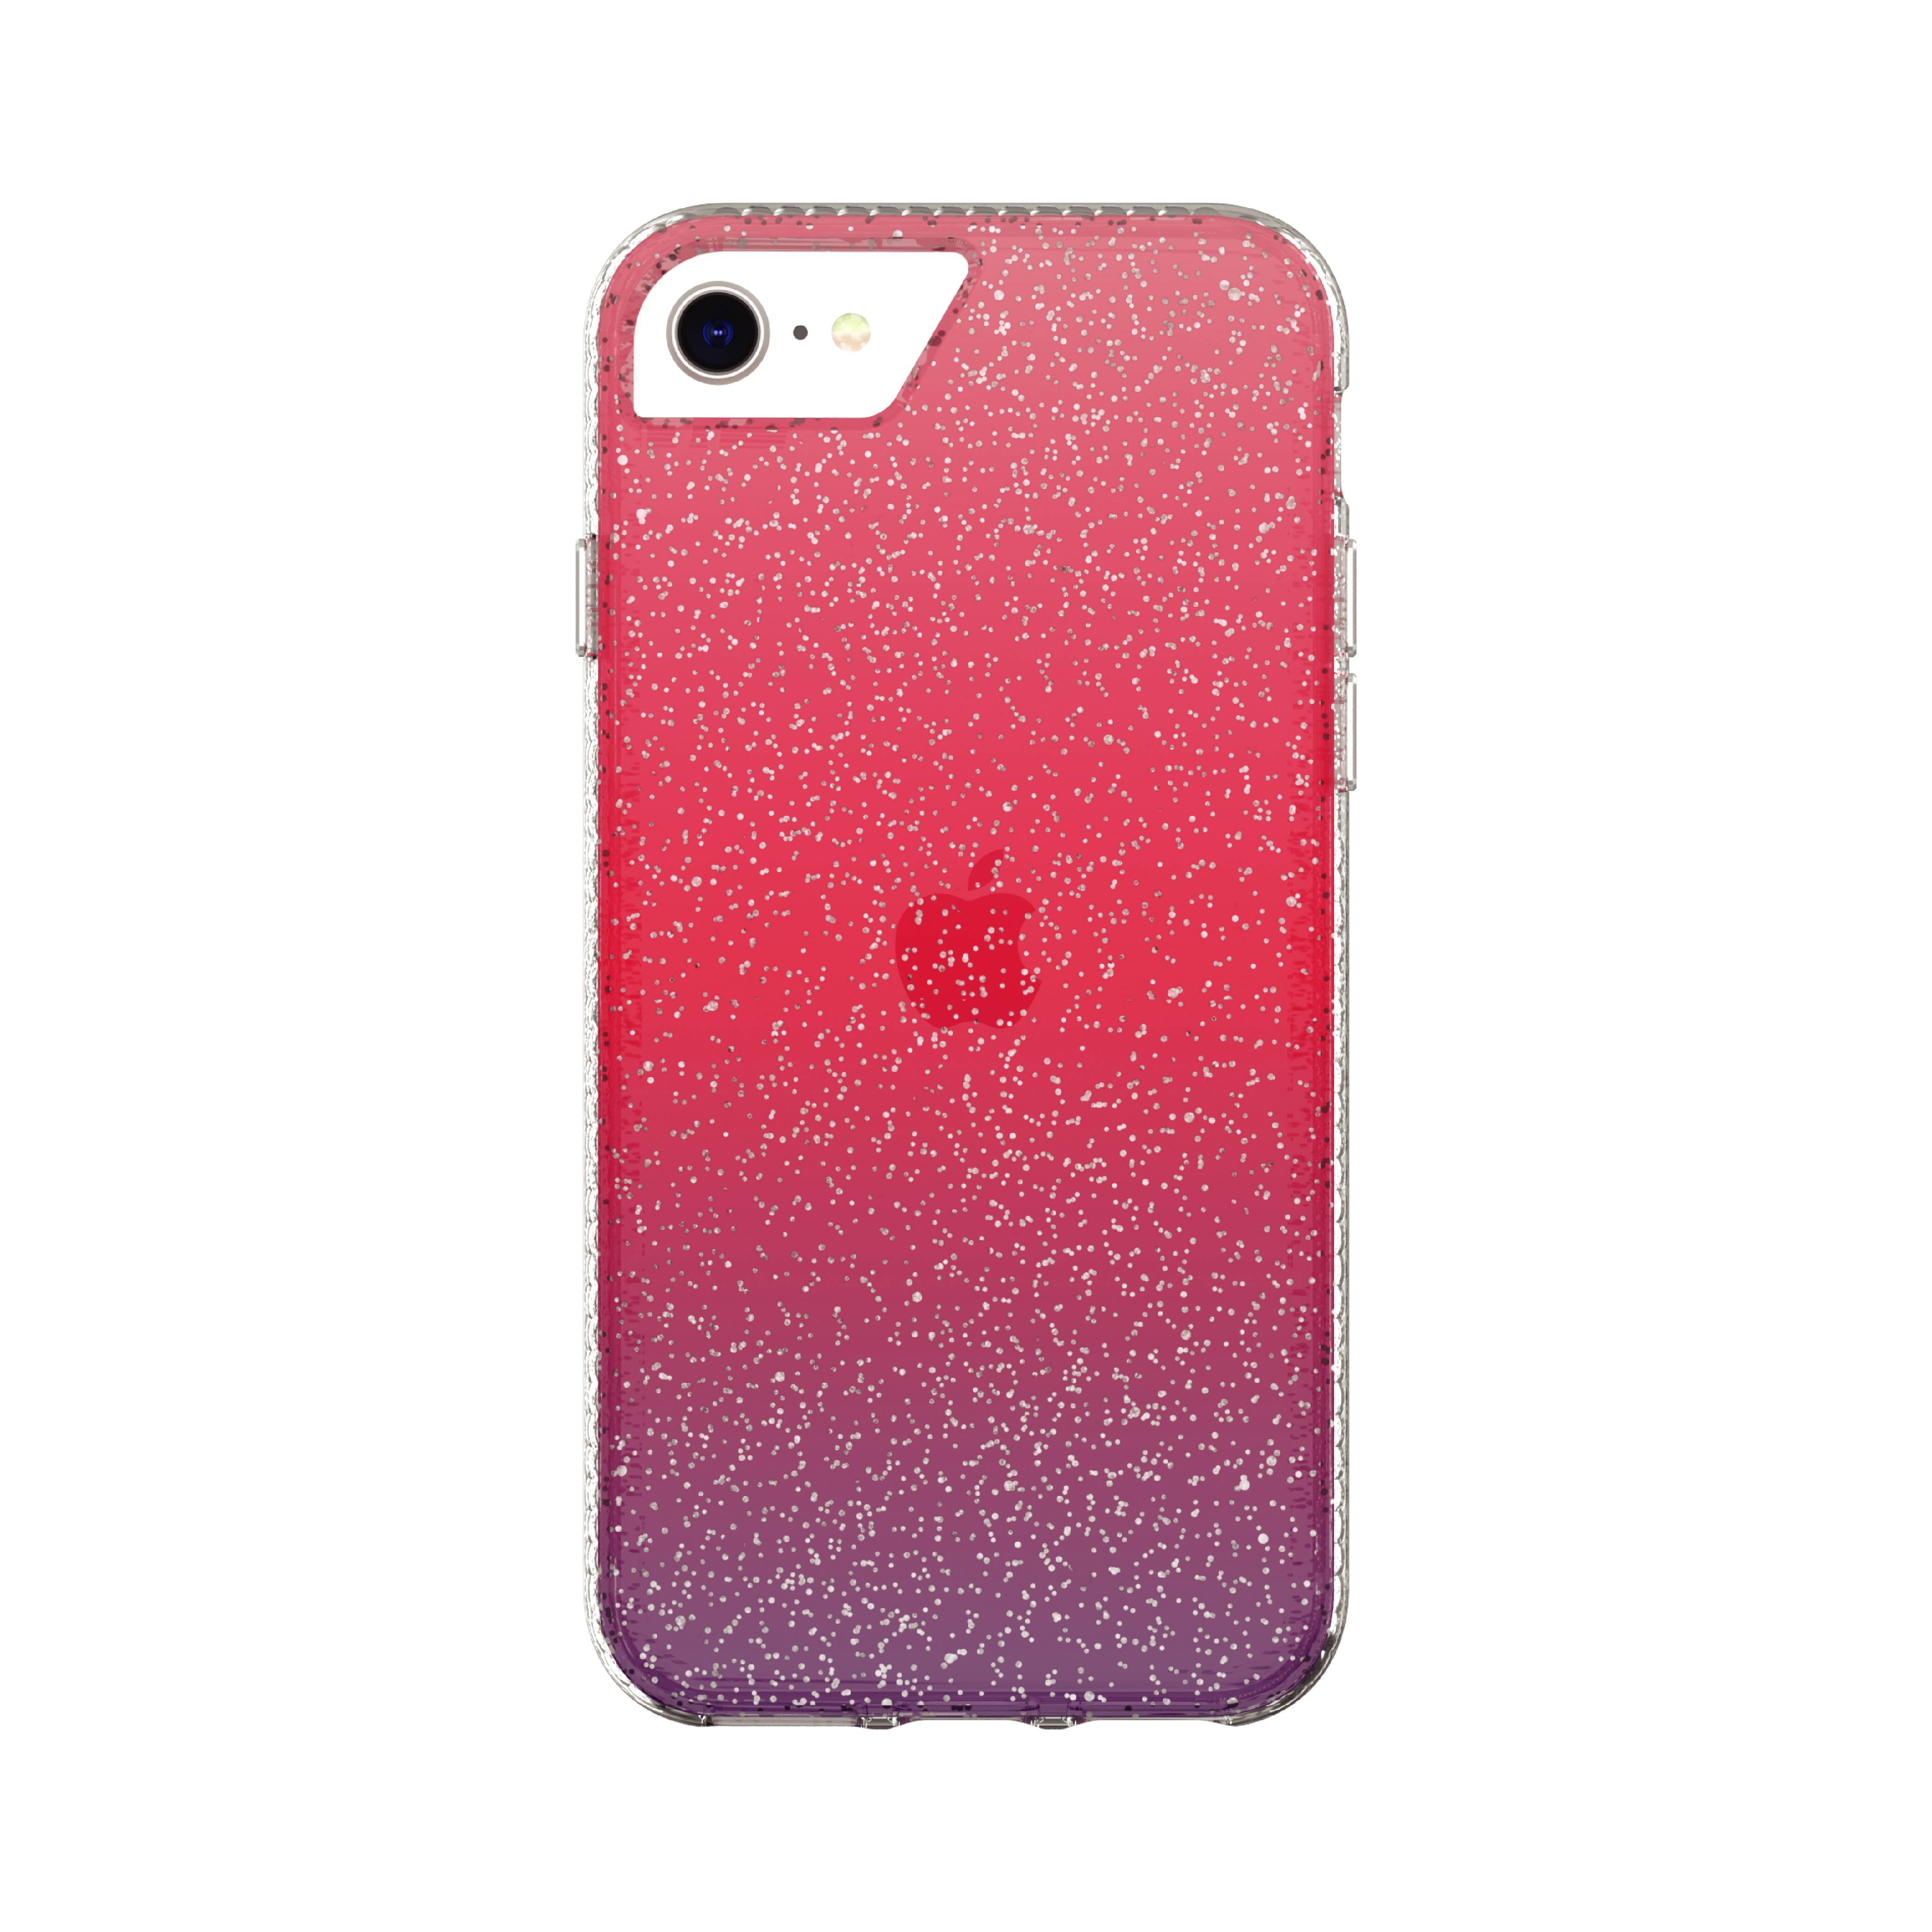 Delegatie kolf galop Fellowes Fashion Phone Case for iPhone 6, 6s, 7, 8, SE 2020 - Purple and  Pink Ombre Glitter - Walmart.com